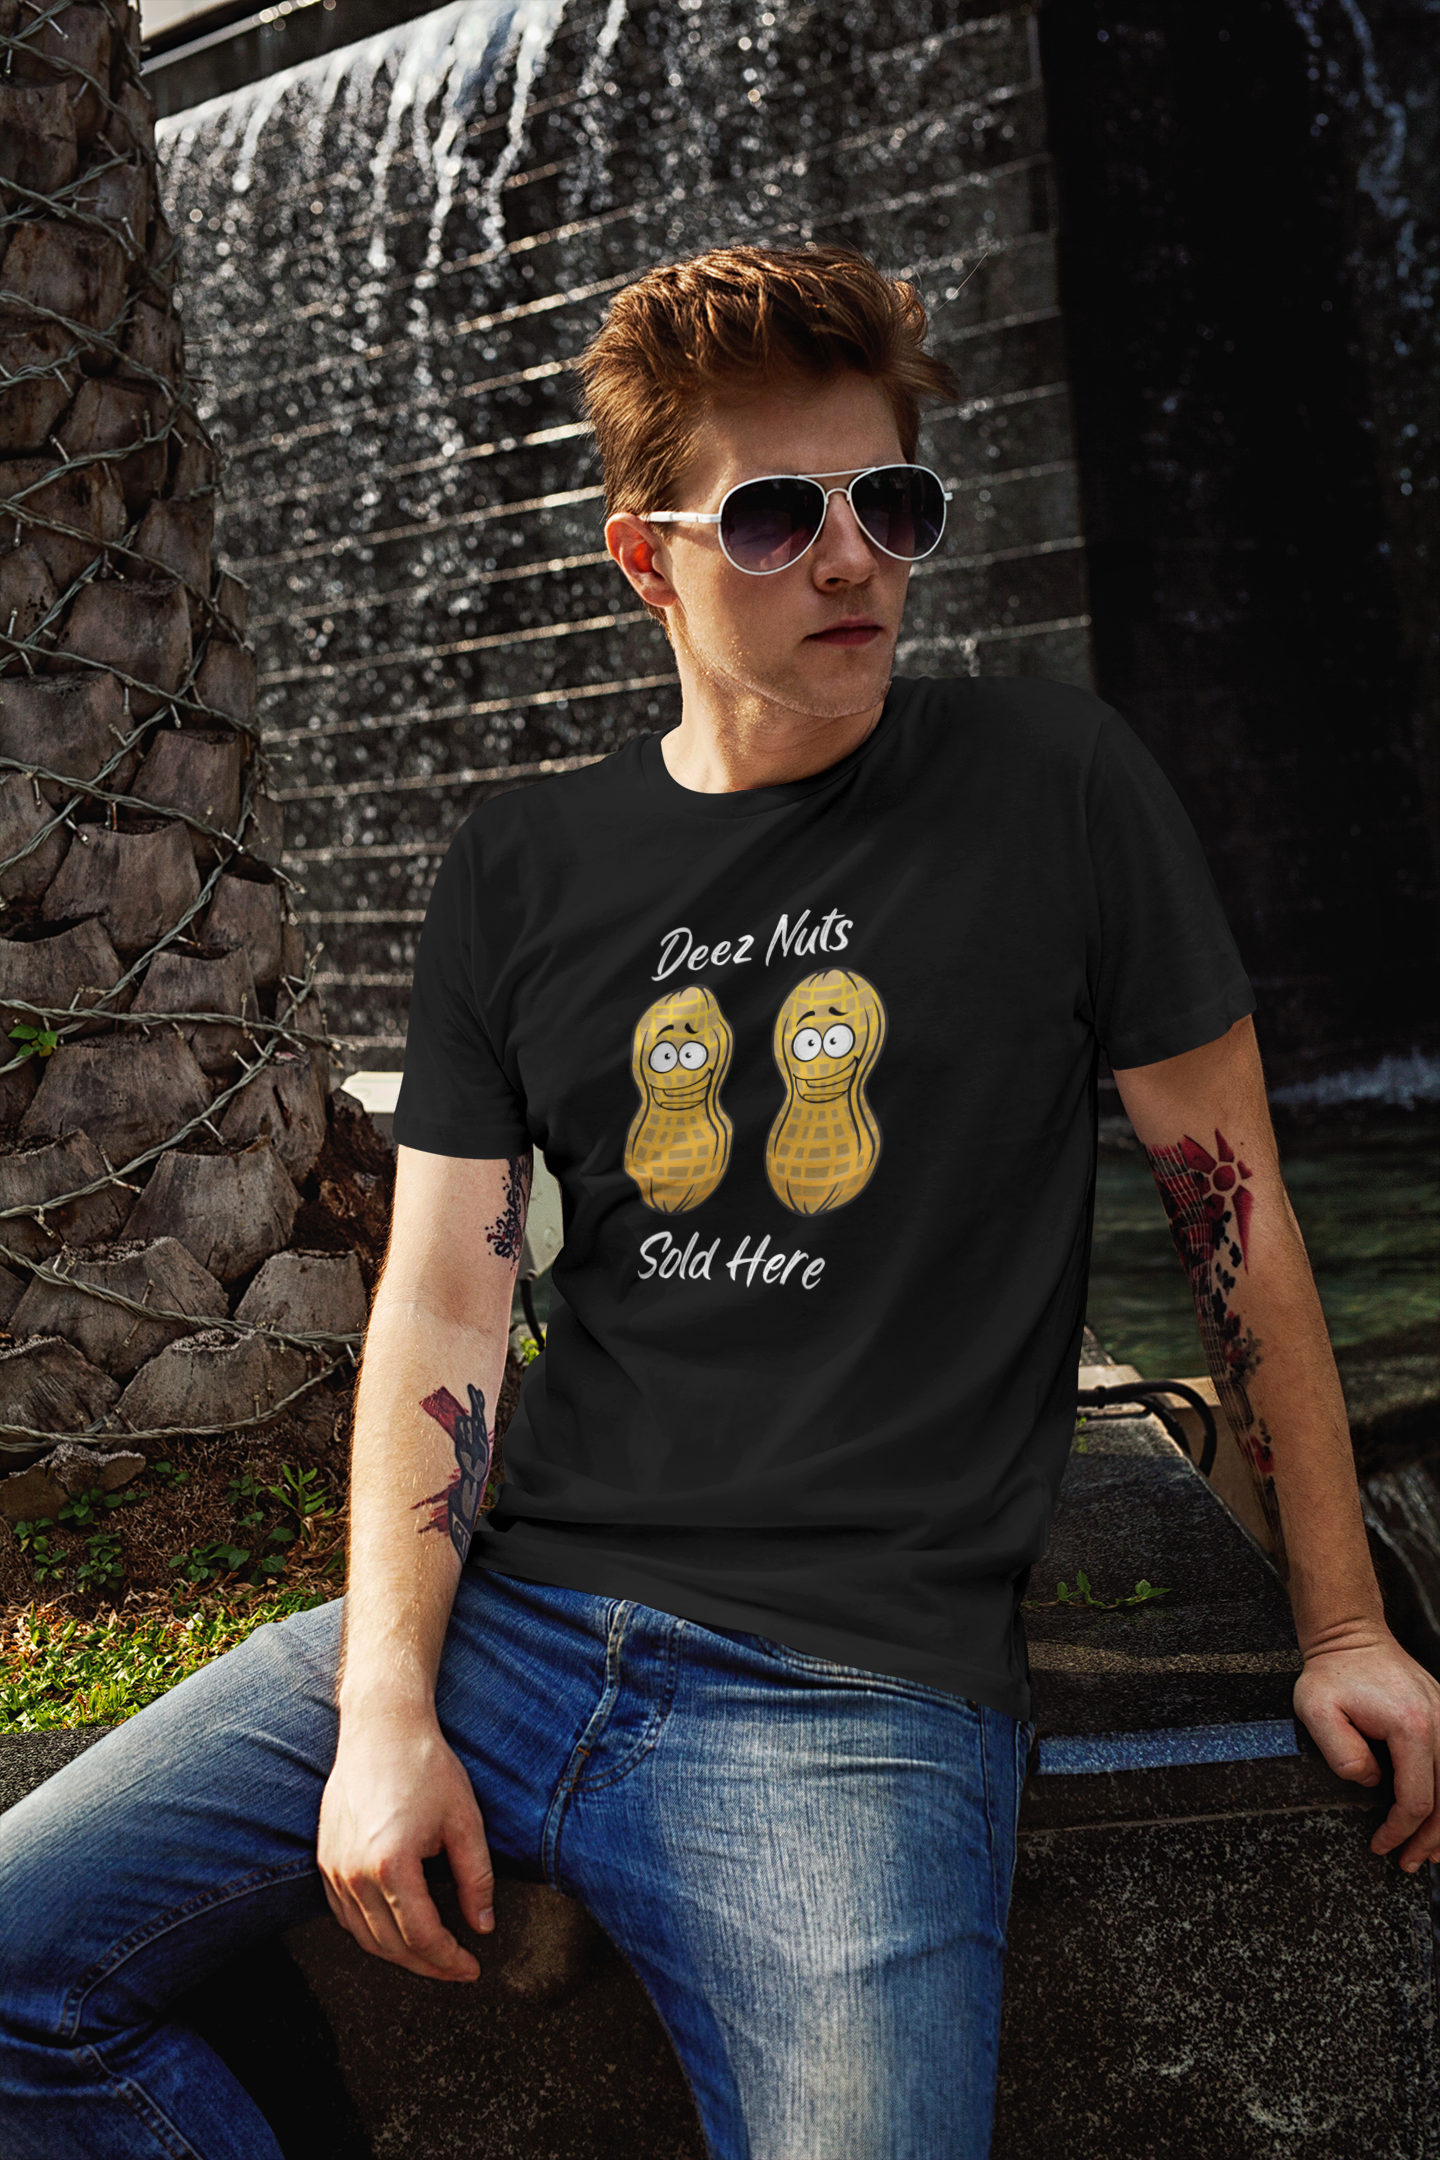 deez nuts sold here t shirt